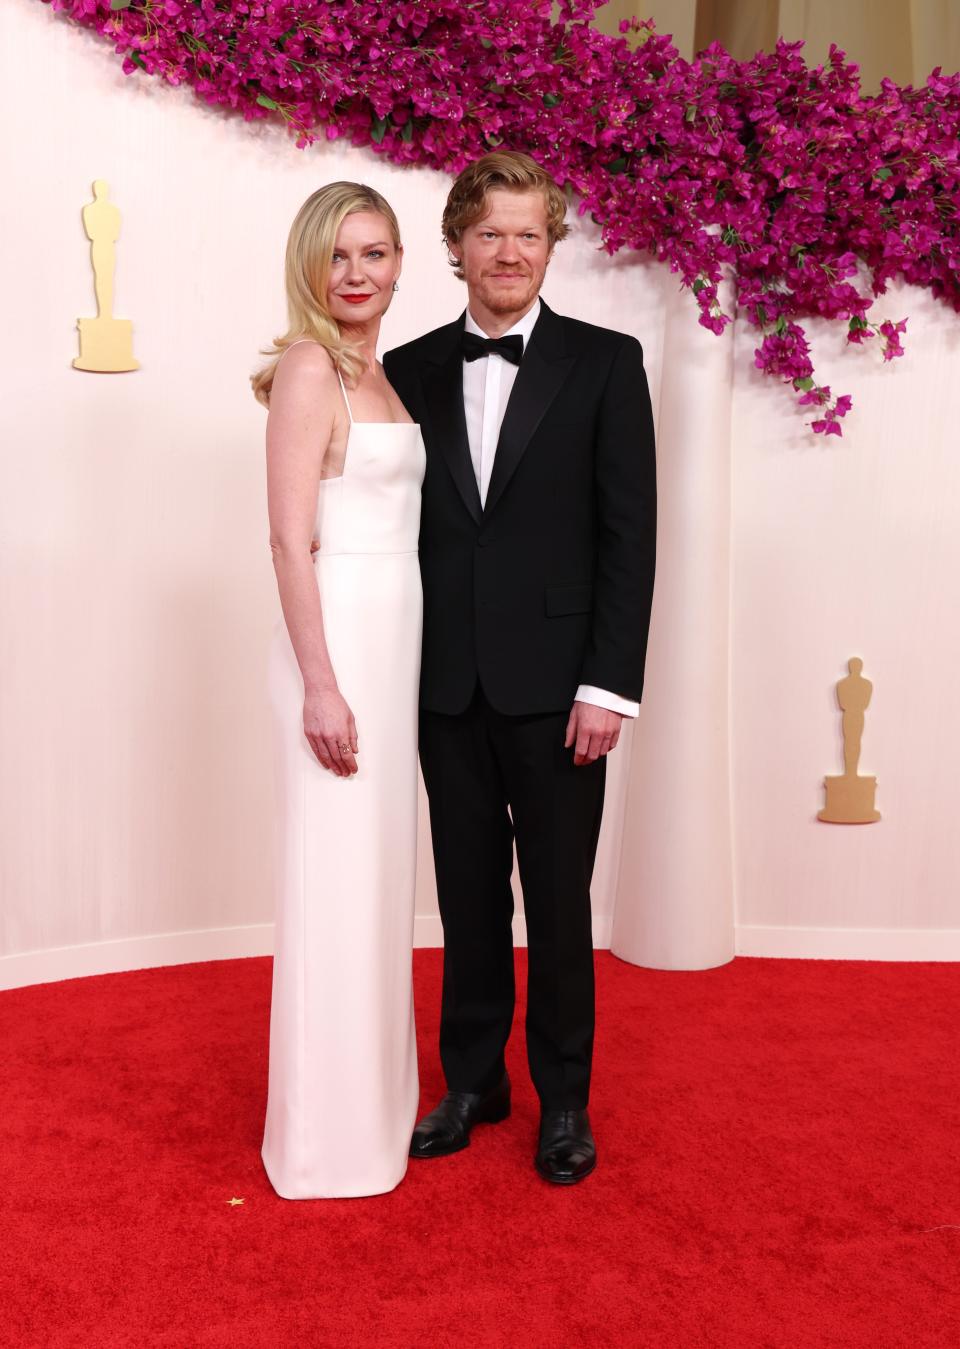 Image may contain: Jesse Plemons, Kirsten Dunst, Fashion, Clothing, Formal Wear, Suit, Accessories, Tie, Adult, and Person